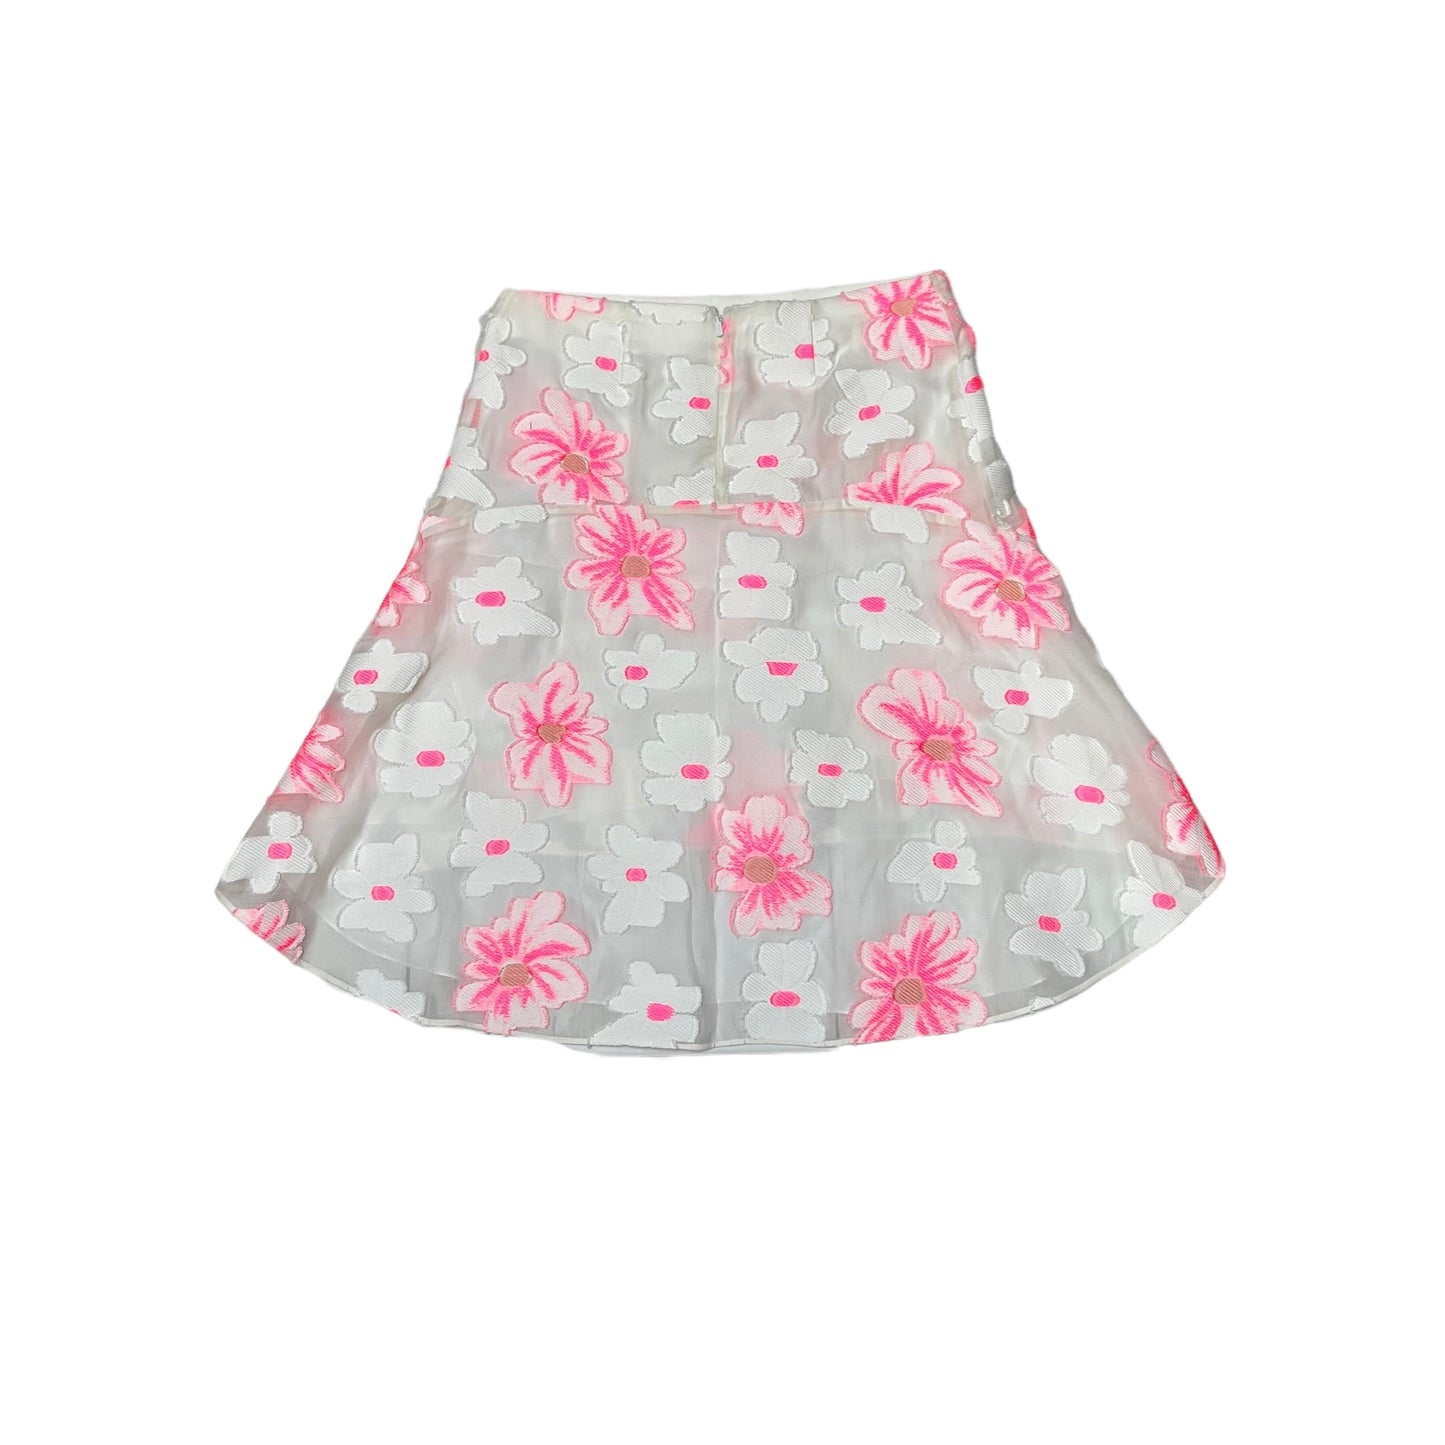 White and Pink Skirt - S